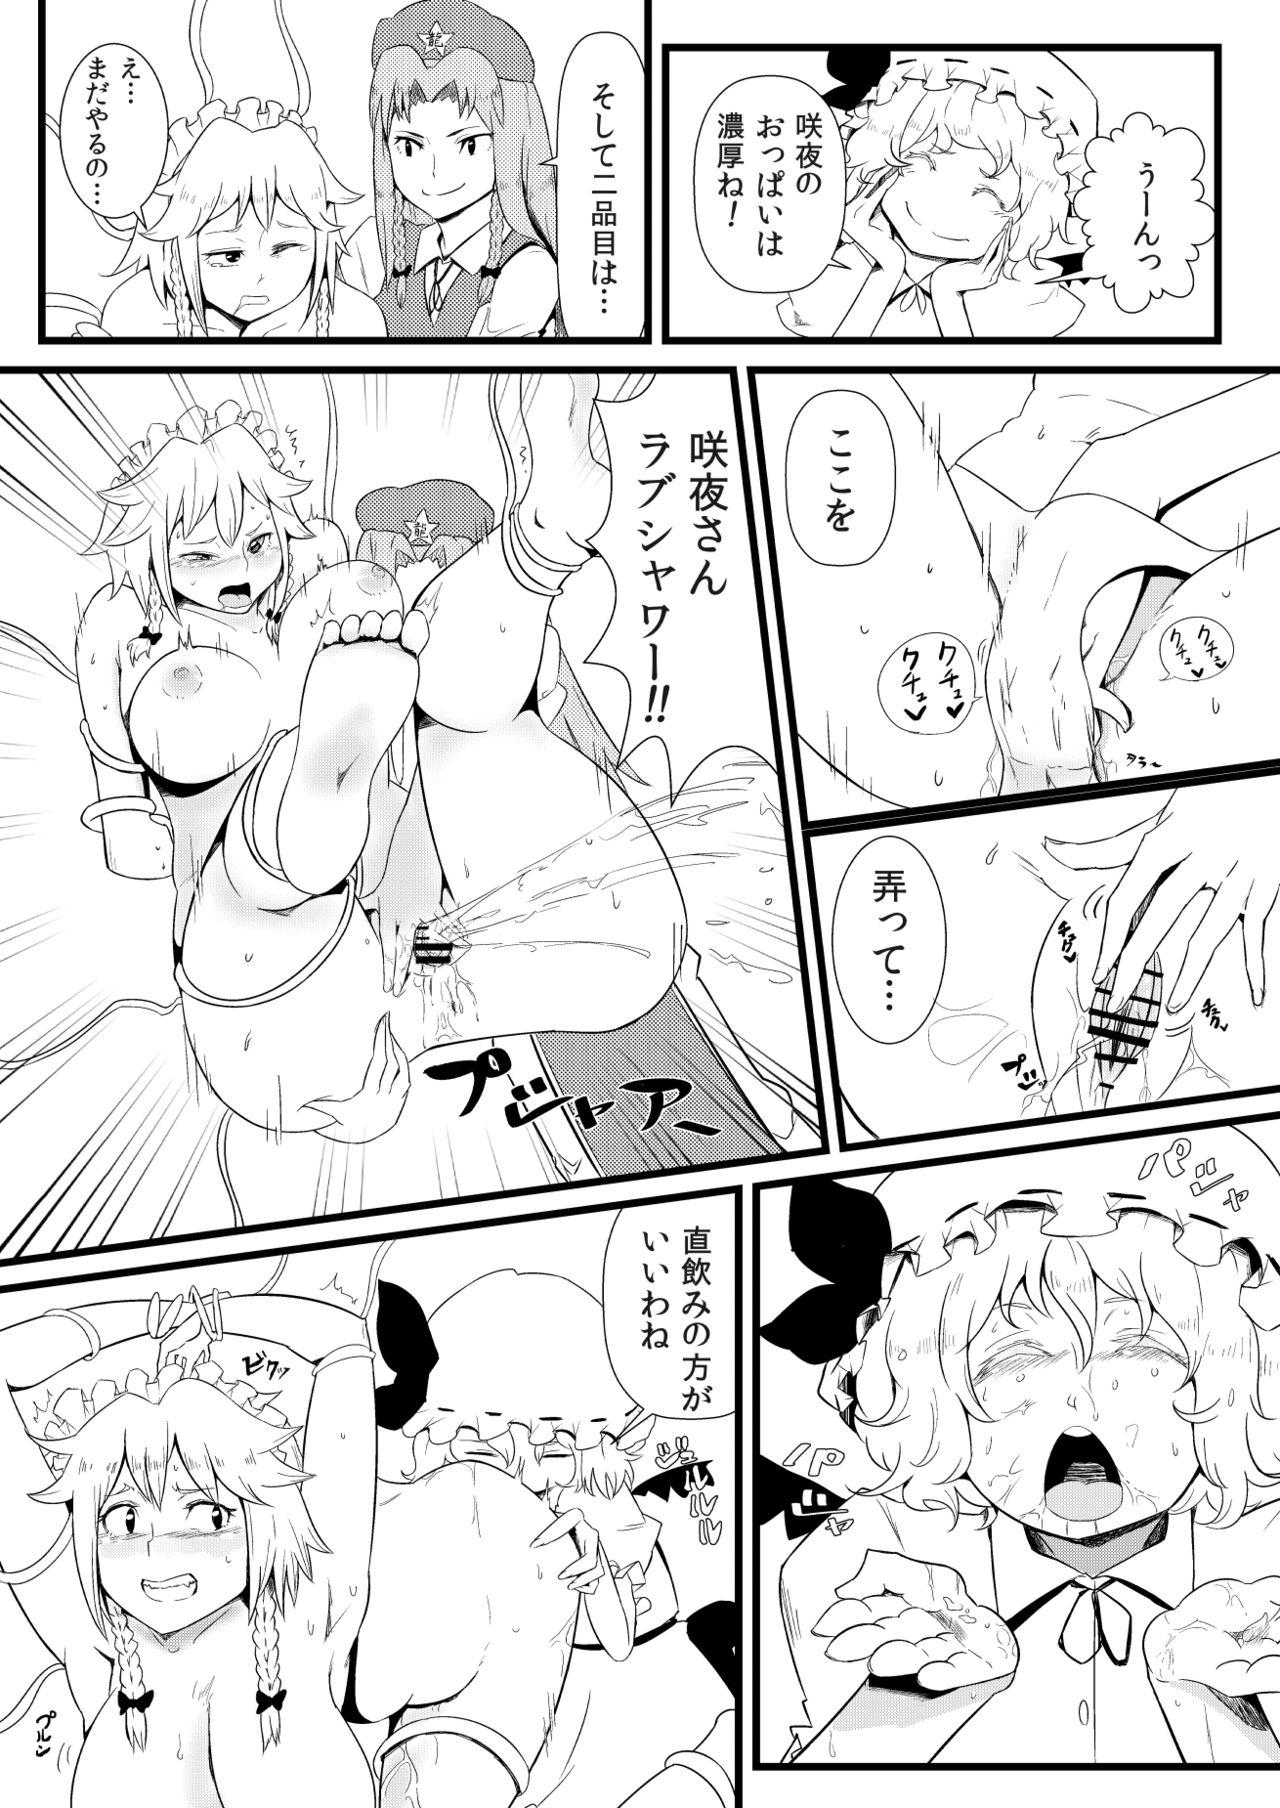 Lesbian 東方板としあき合同誌5 - Touhou project Leche - Page 7